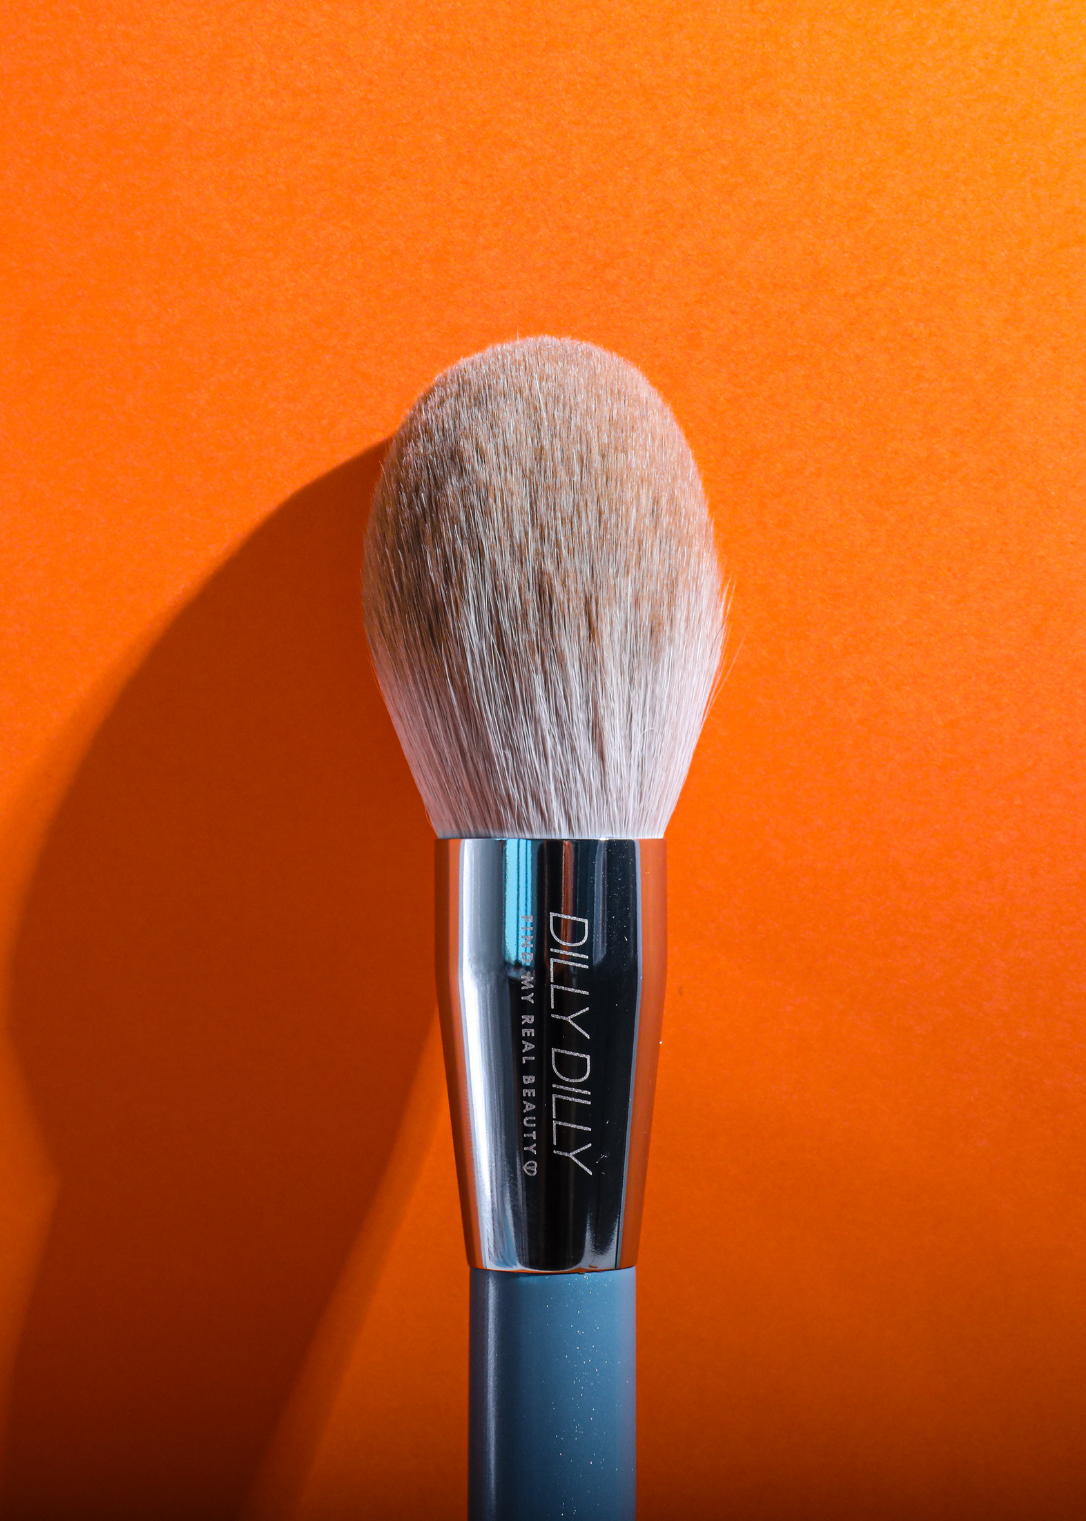 Luxe Feather Face and Cheek Powder Brush